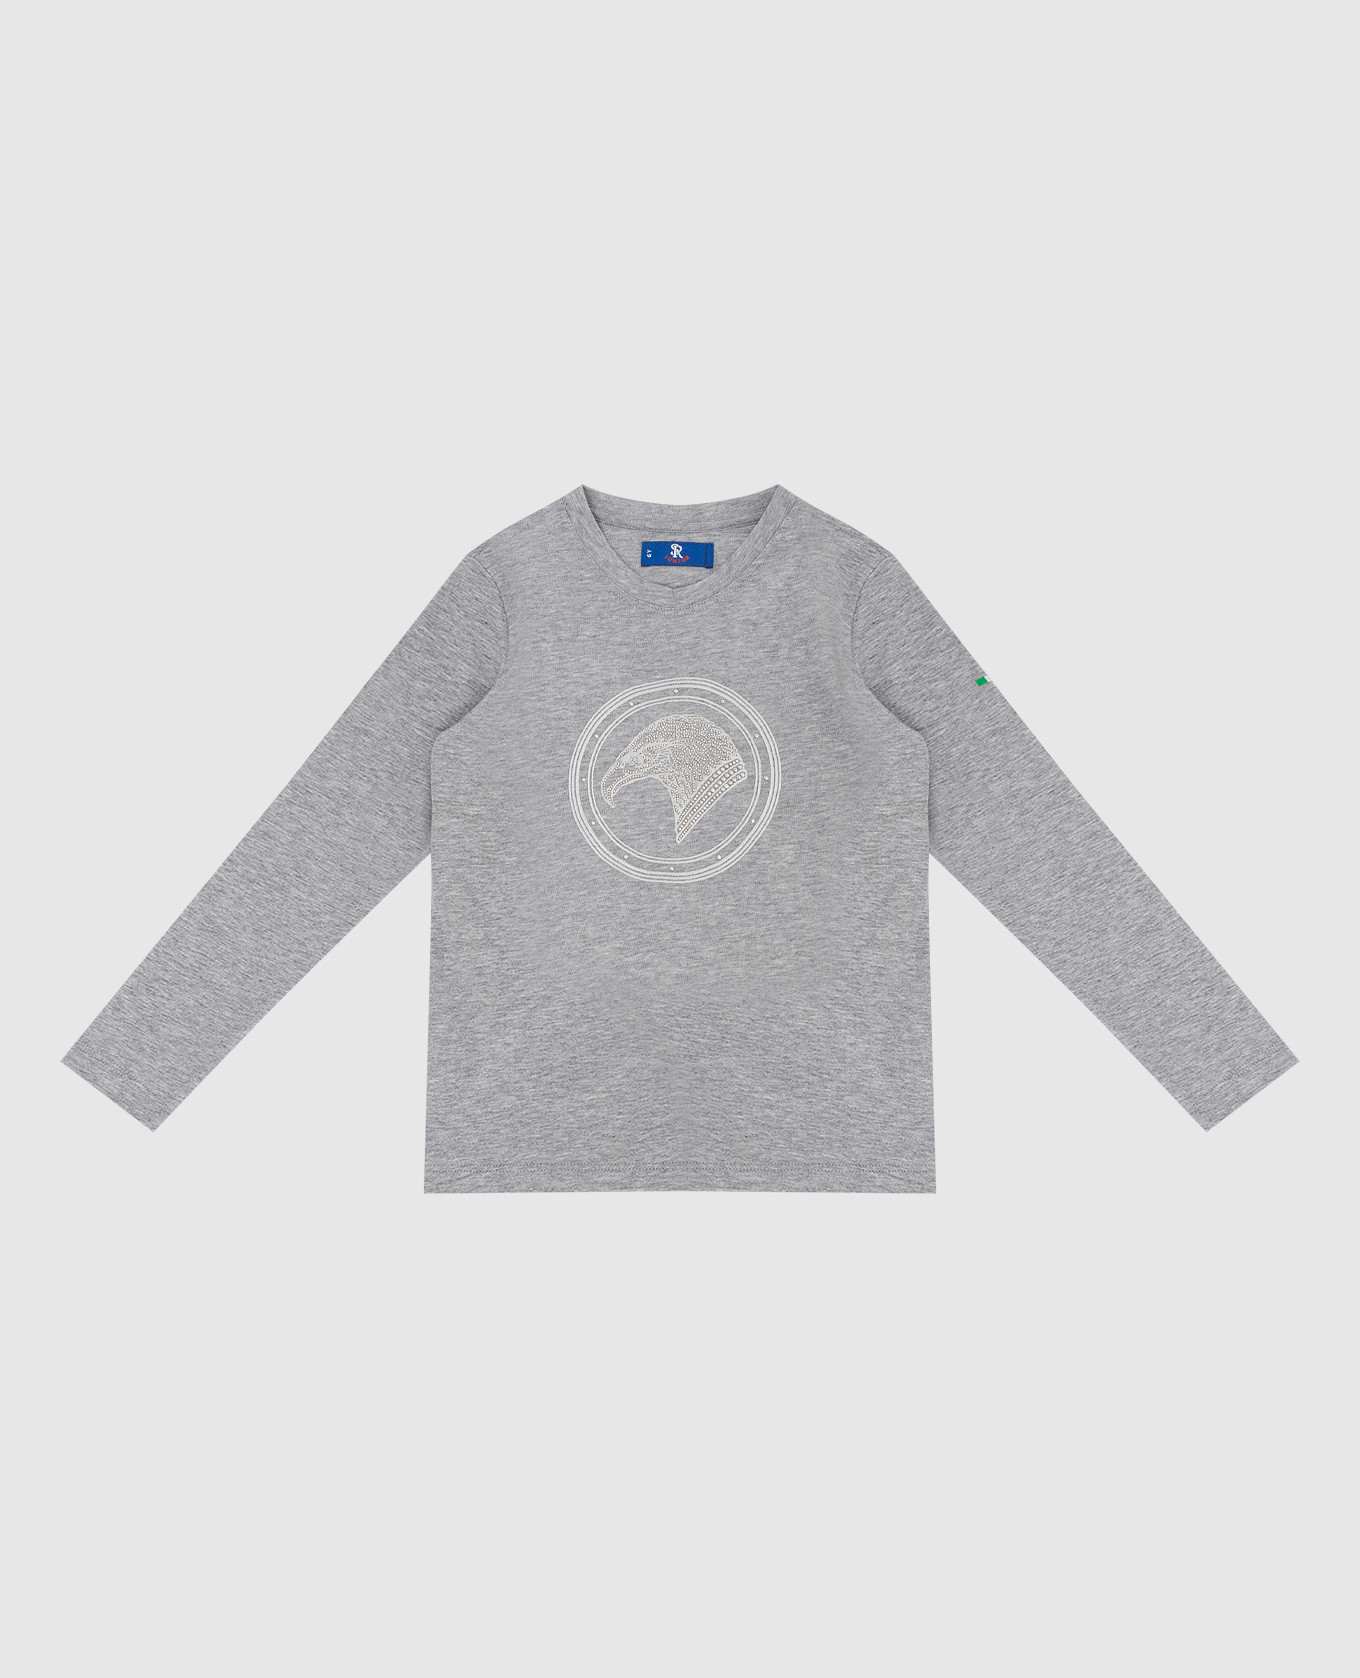 Children's longsleeve with an emblem in crystals